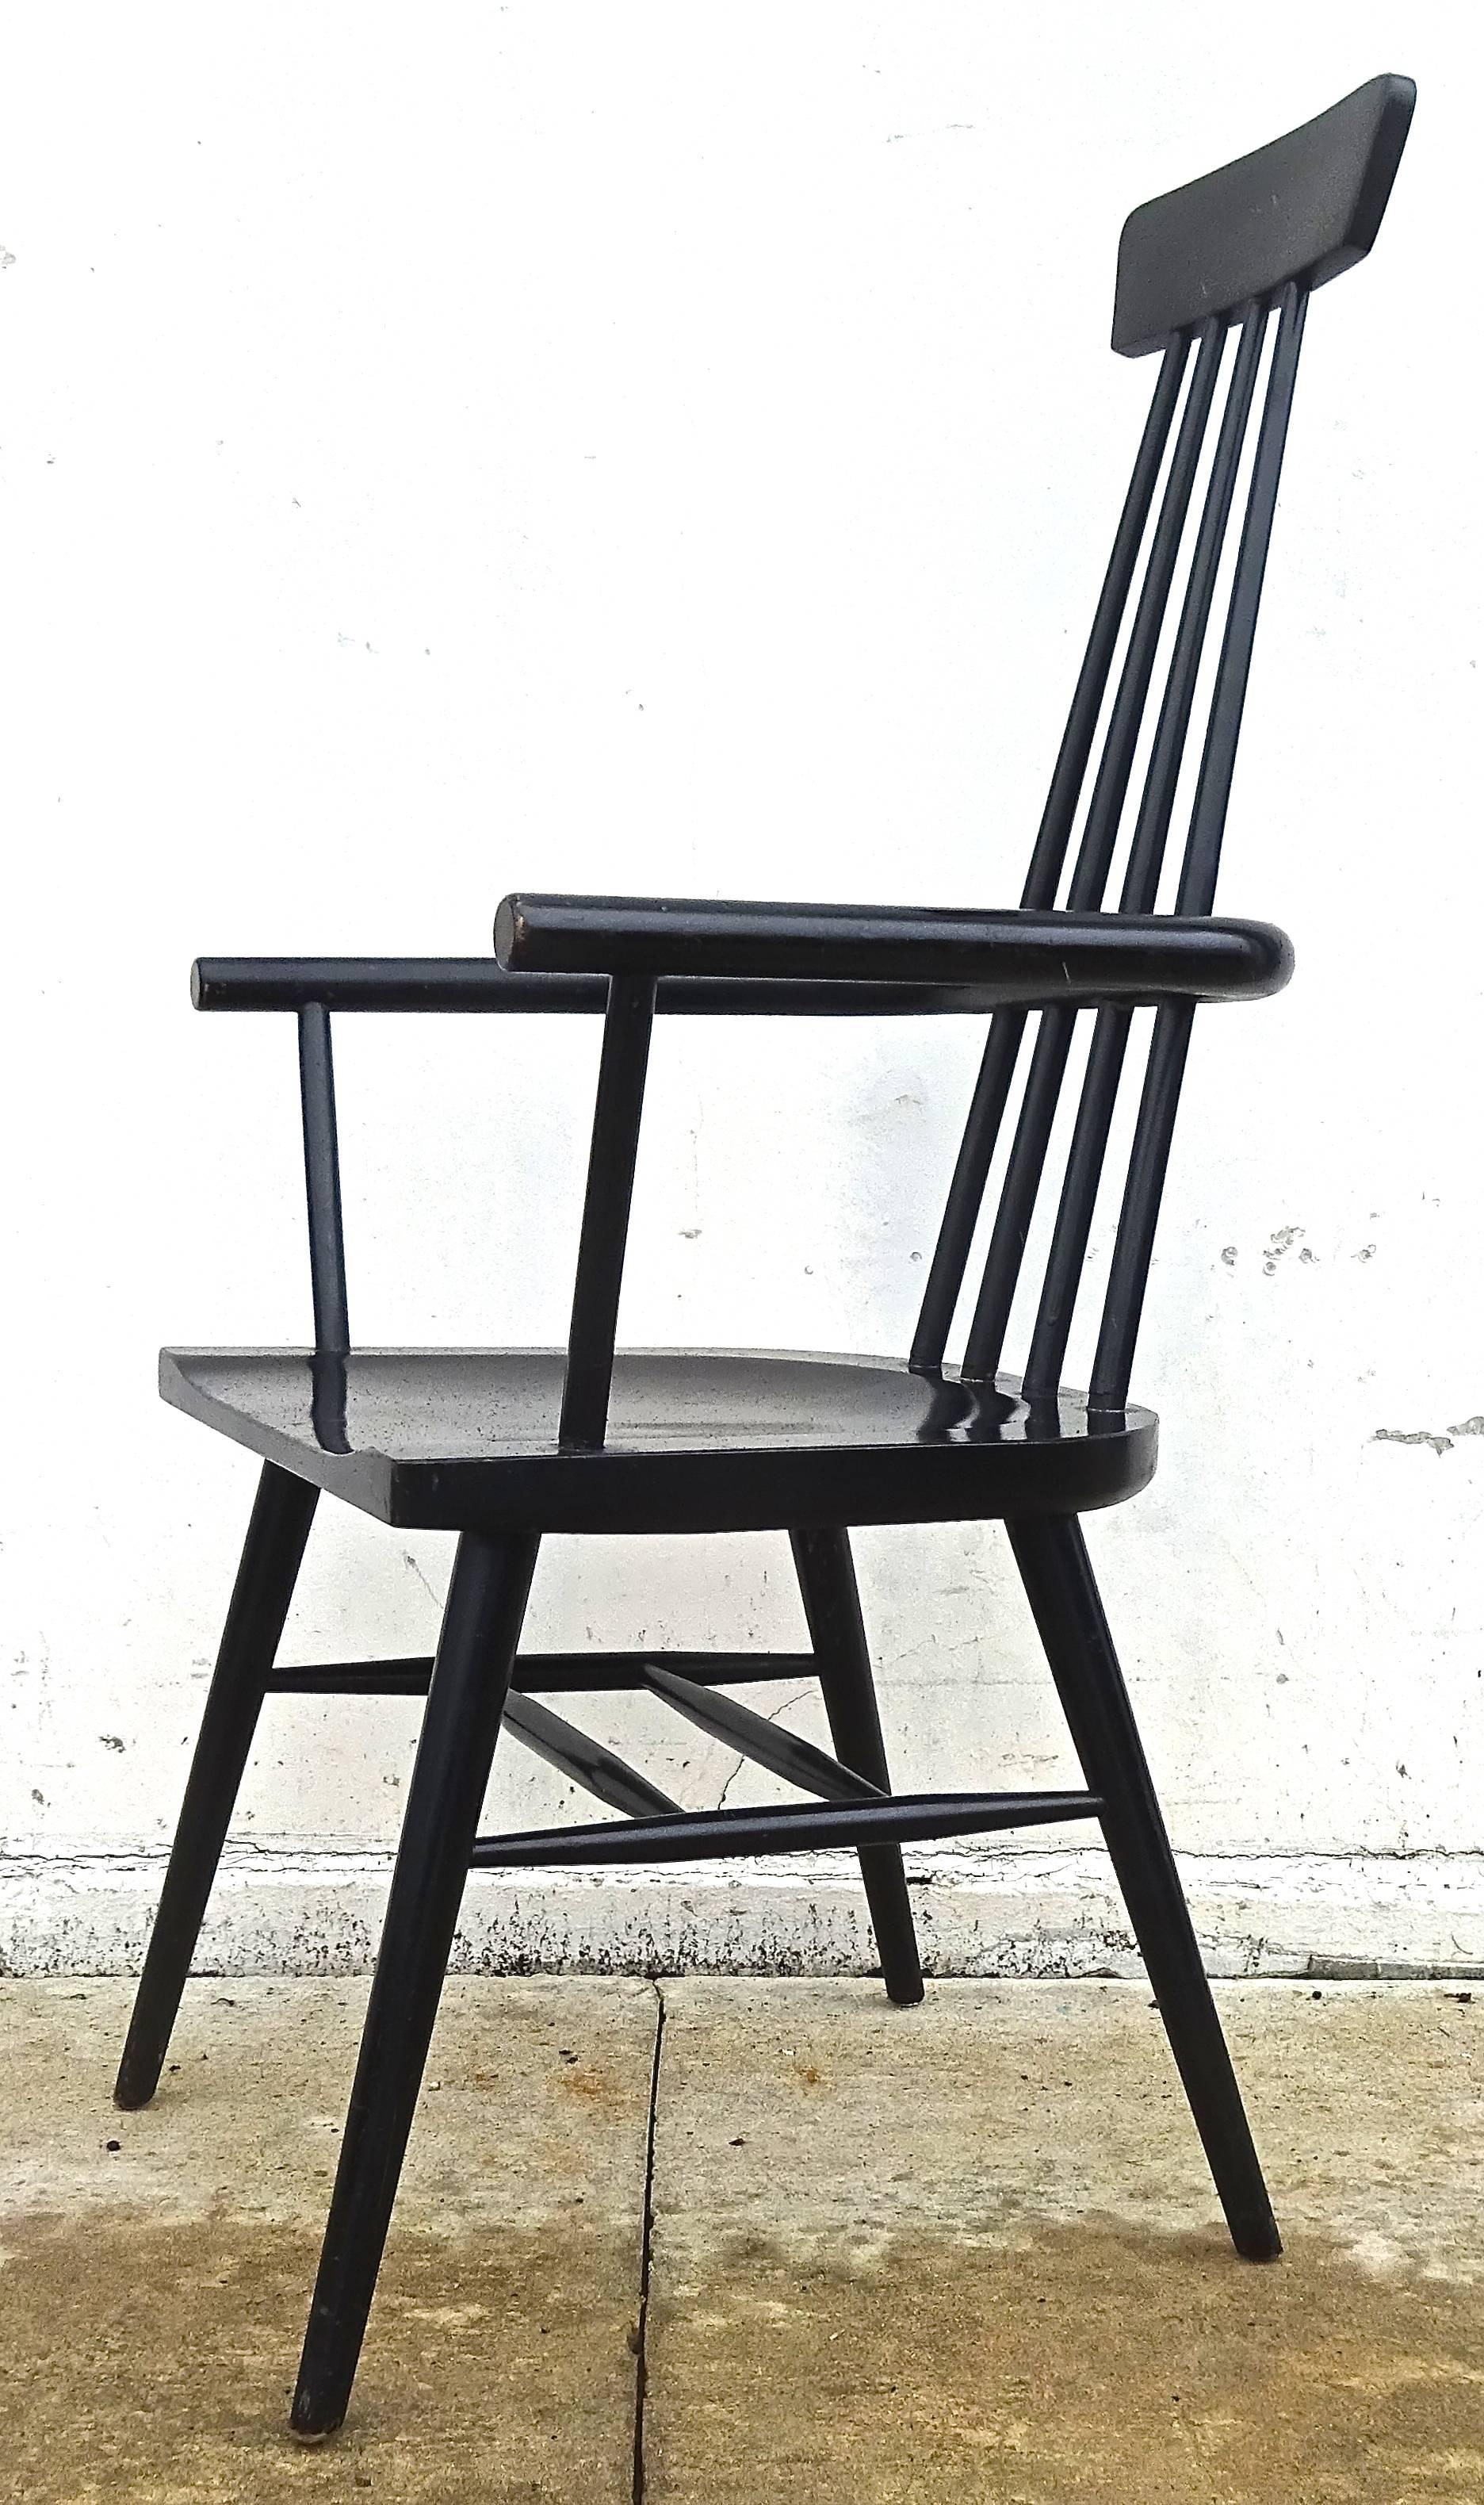 Rare 1950s Paul McCobb Lacquered Modernist Windsor Chair In Excellent Condition For Sale In Washington, DC